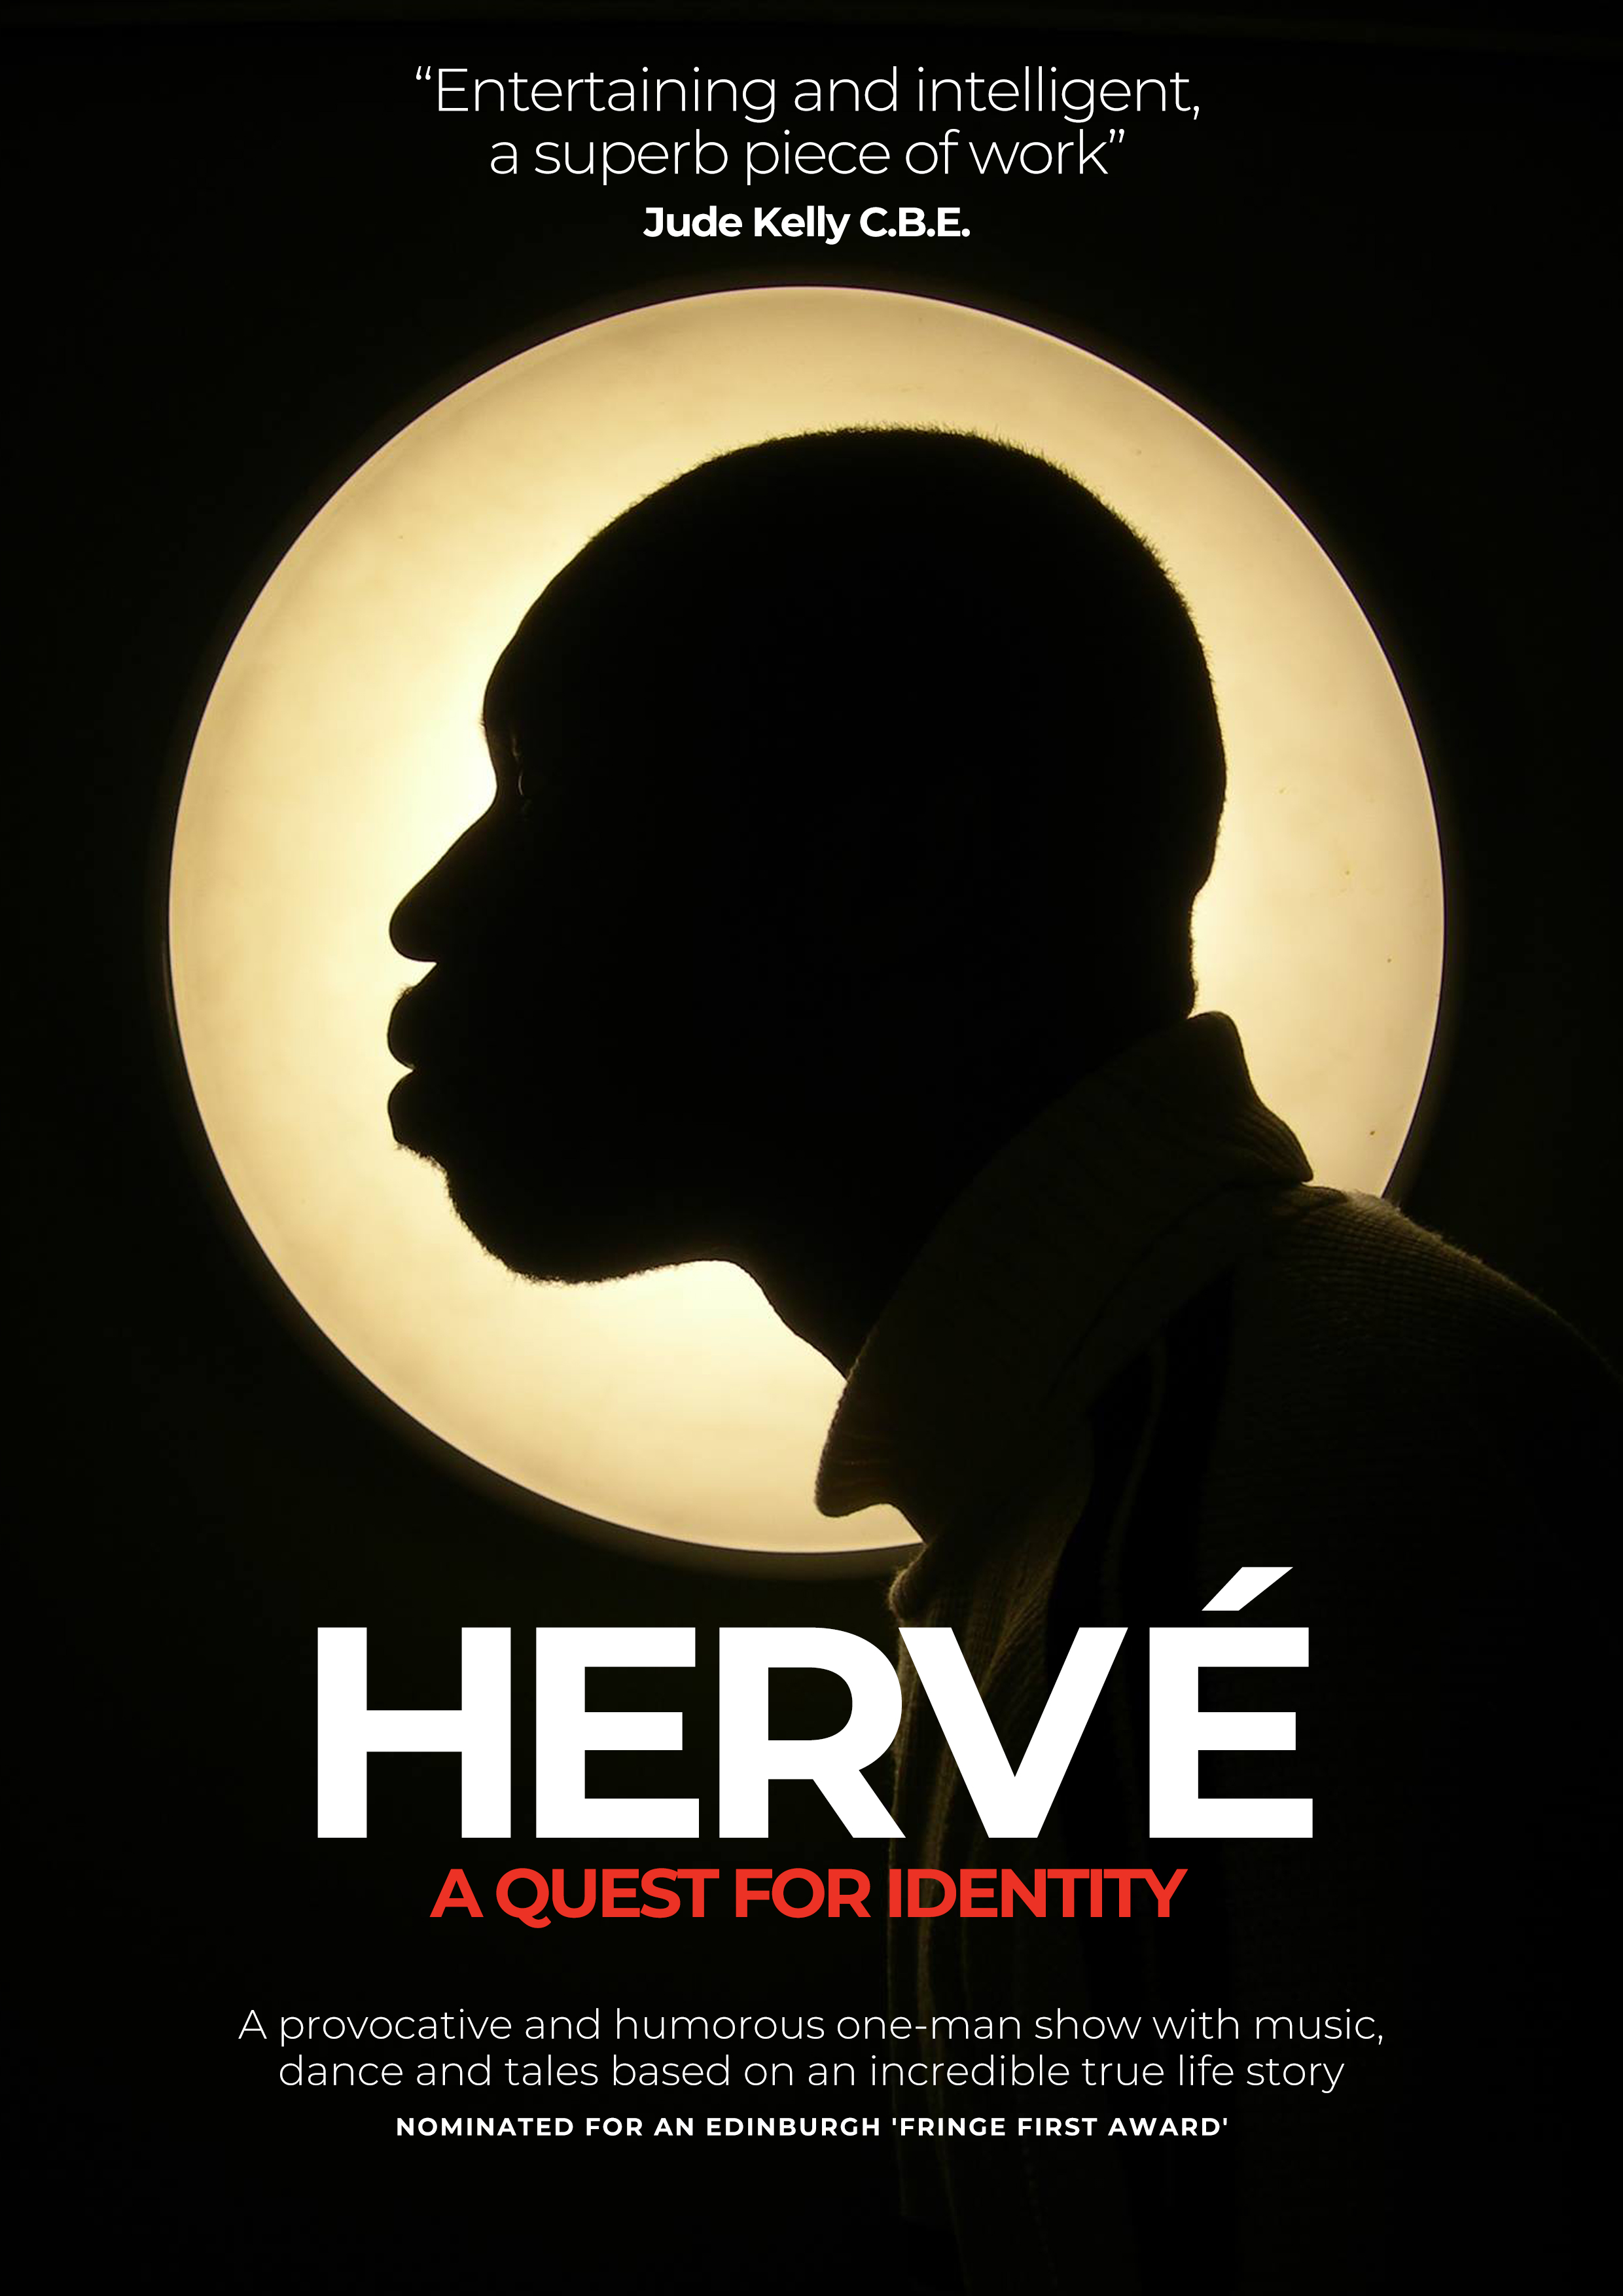 ‘HERVÉ: A QUEST FOR IDENTITY’